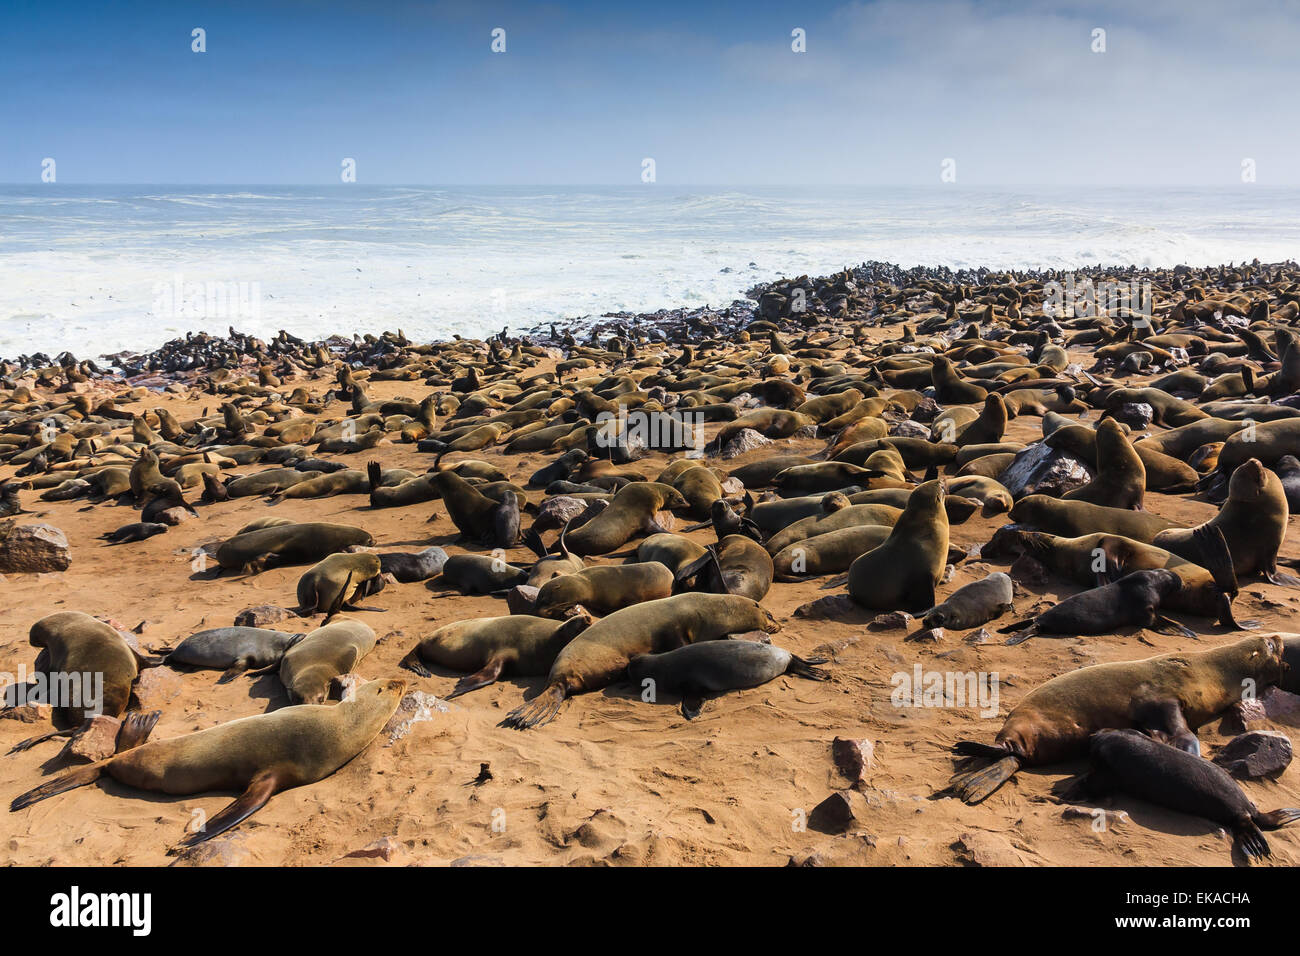 Cape fur seal gathering. They lie and rest on beach of Cape cross. Rough atlantic ocean Namibia Africa. Stock Photo